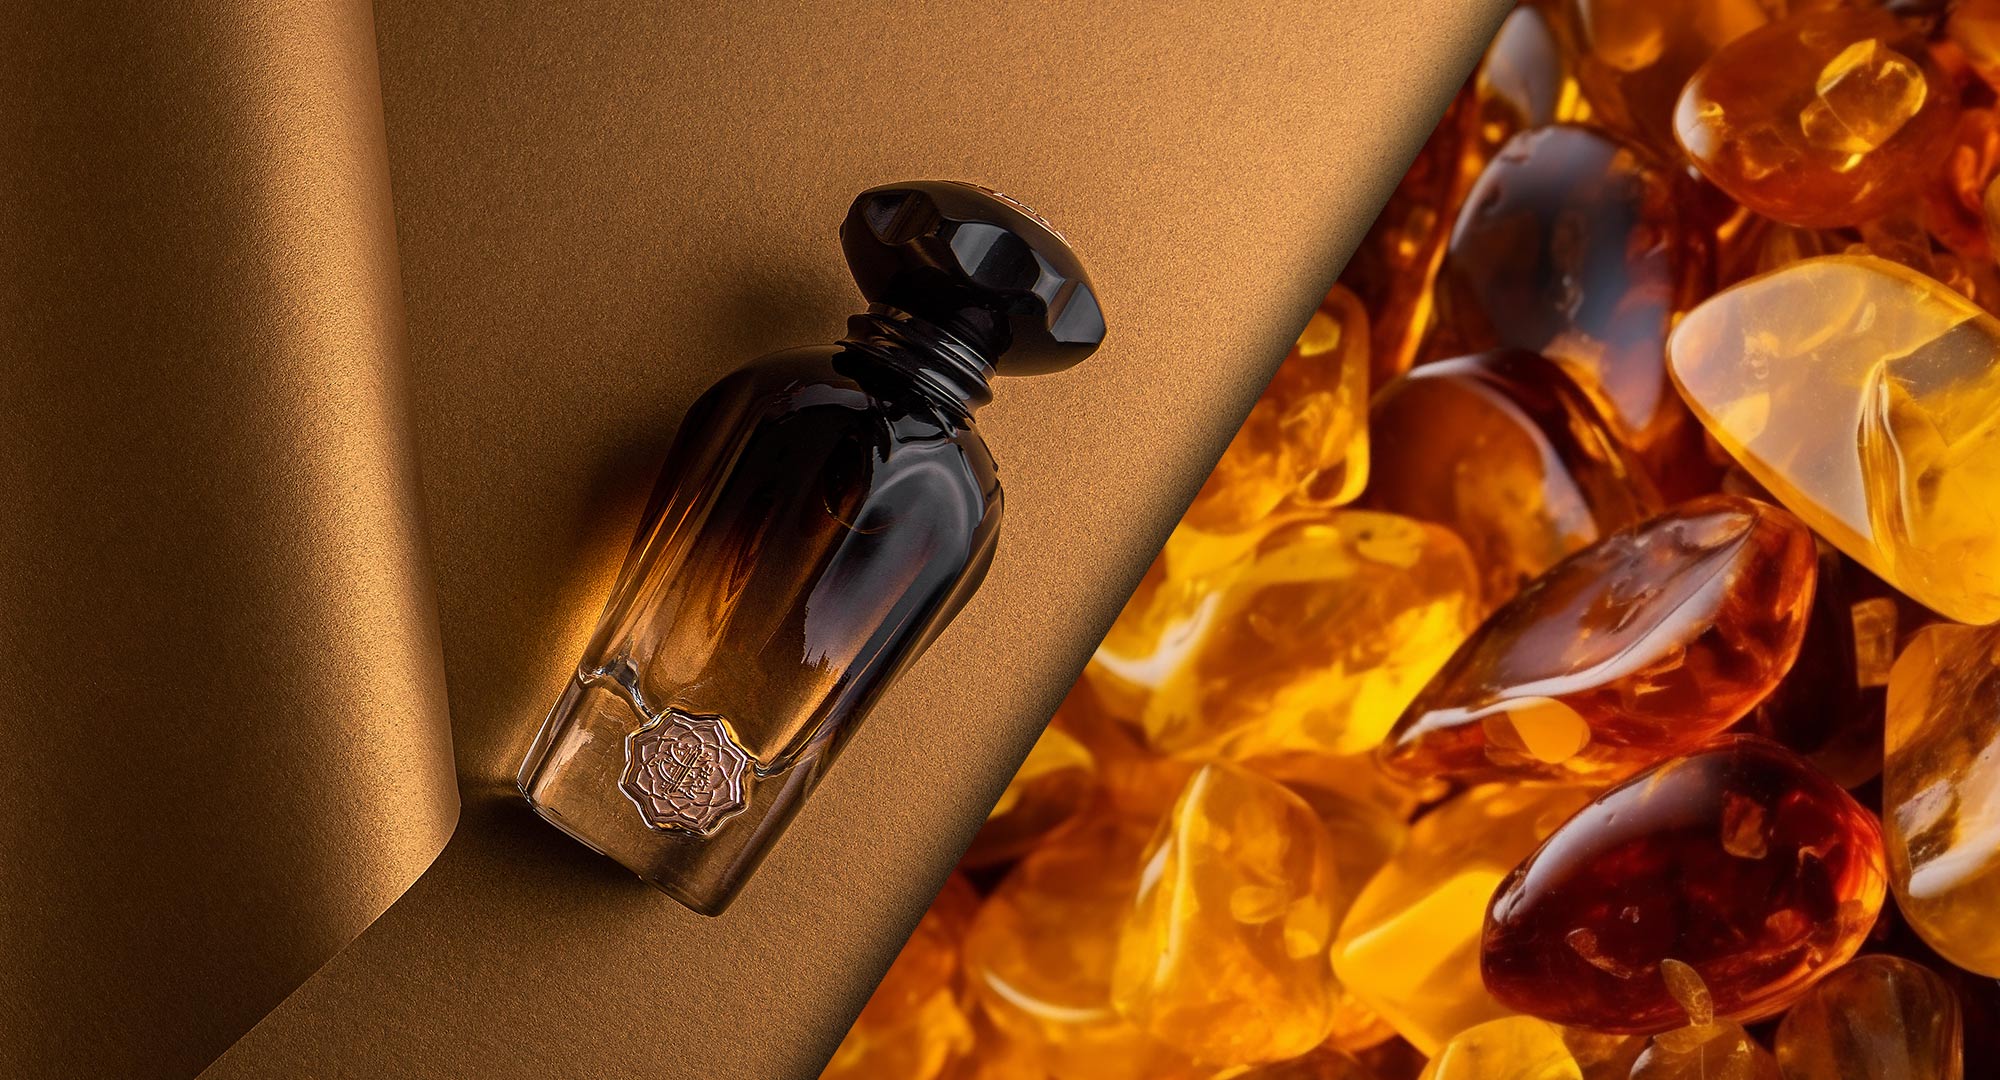 What Are Oriental Perfumes?